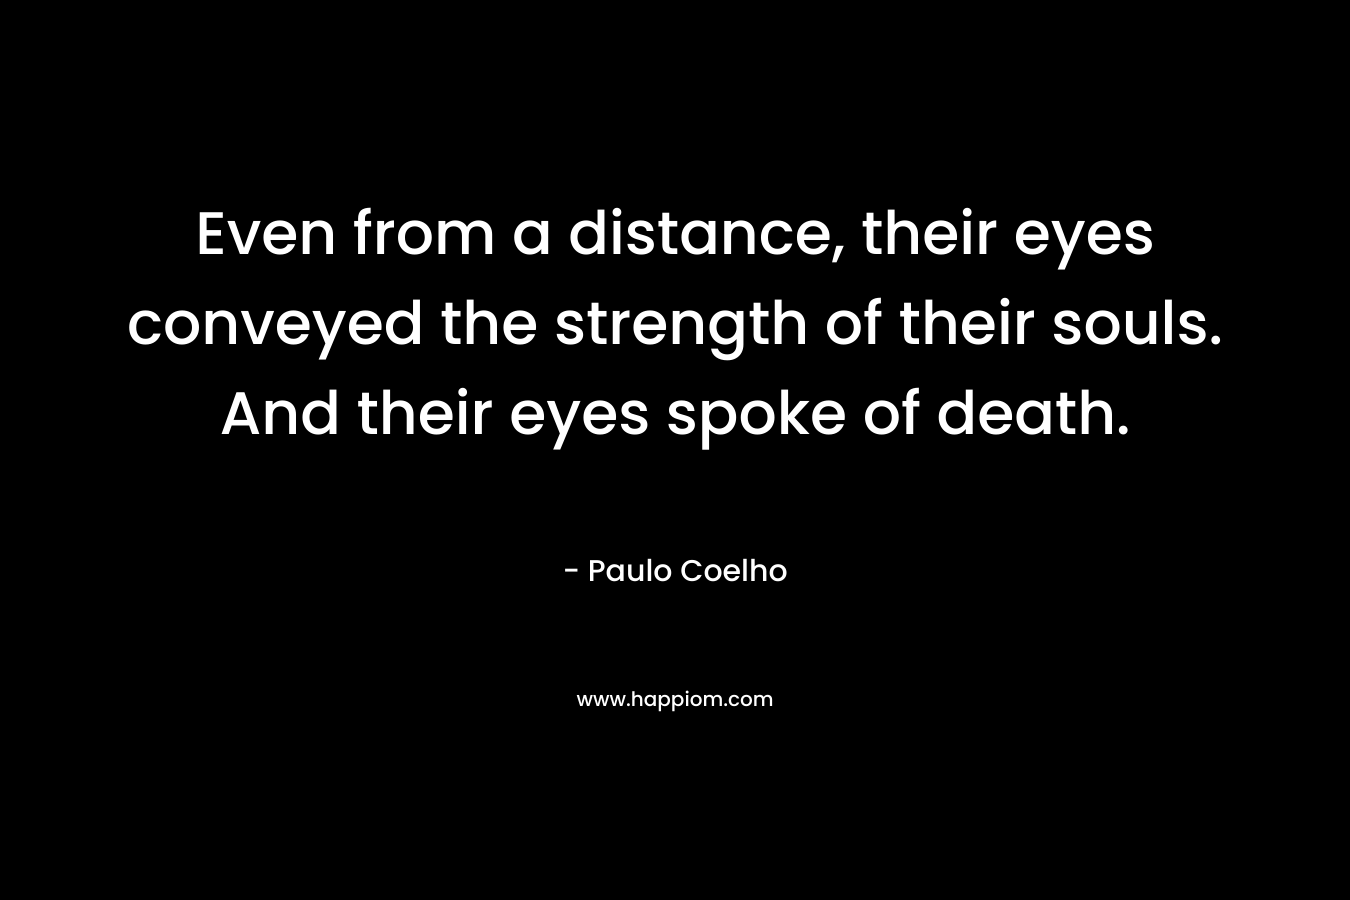 Even from a distance, their eyes conveyed the strength of their souls. And their eyes spoke of death.